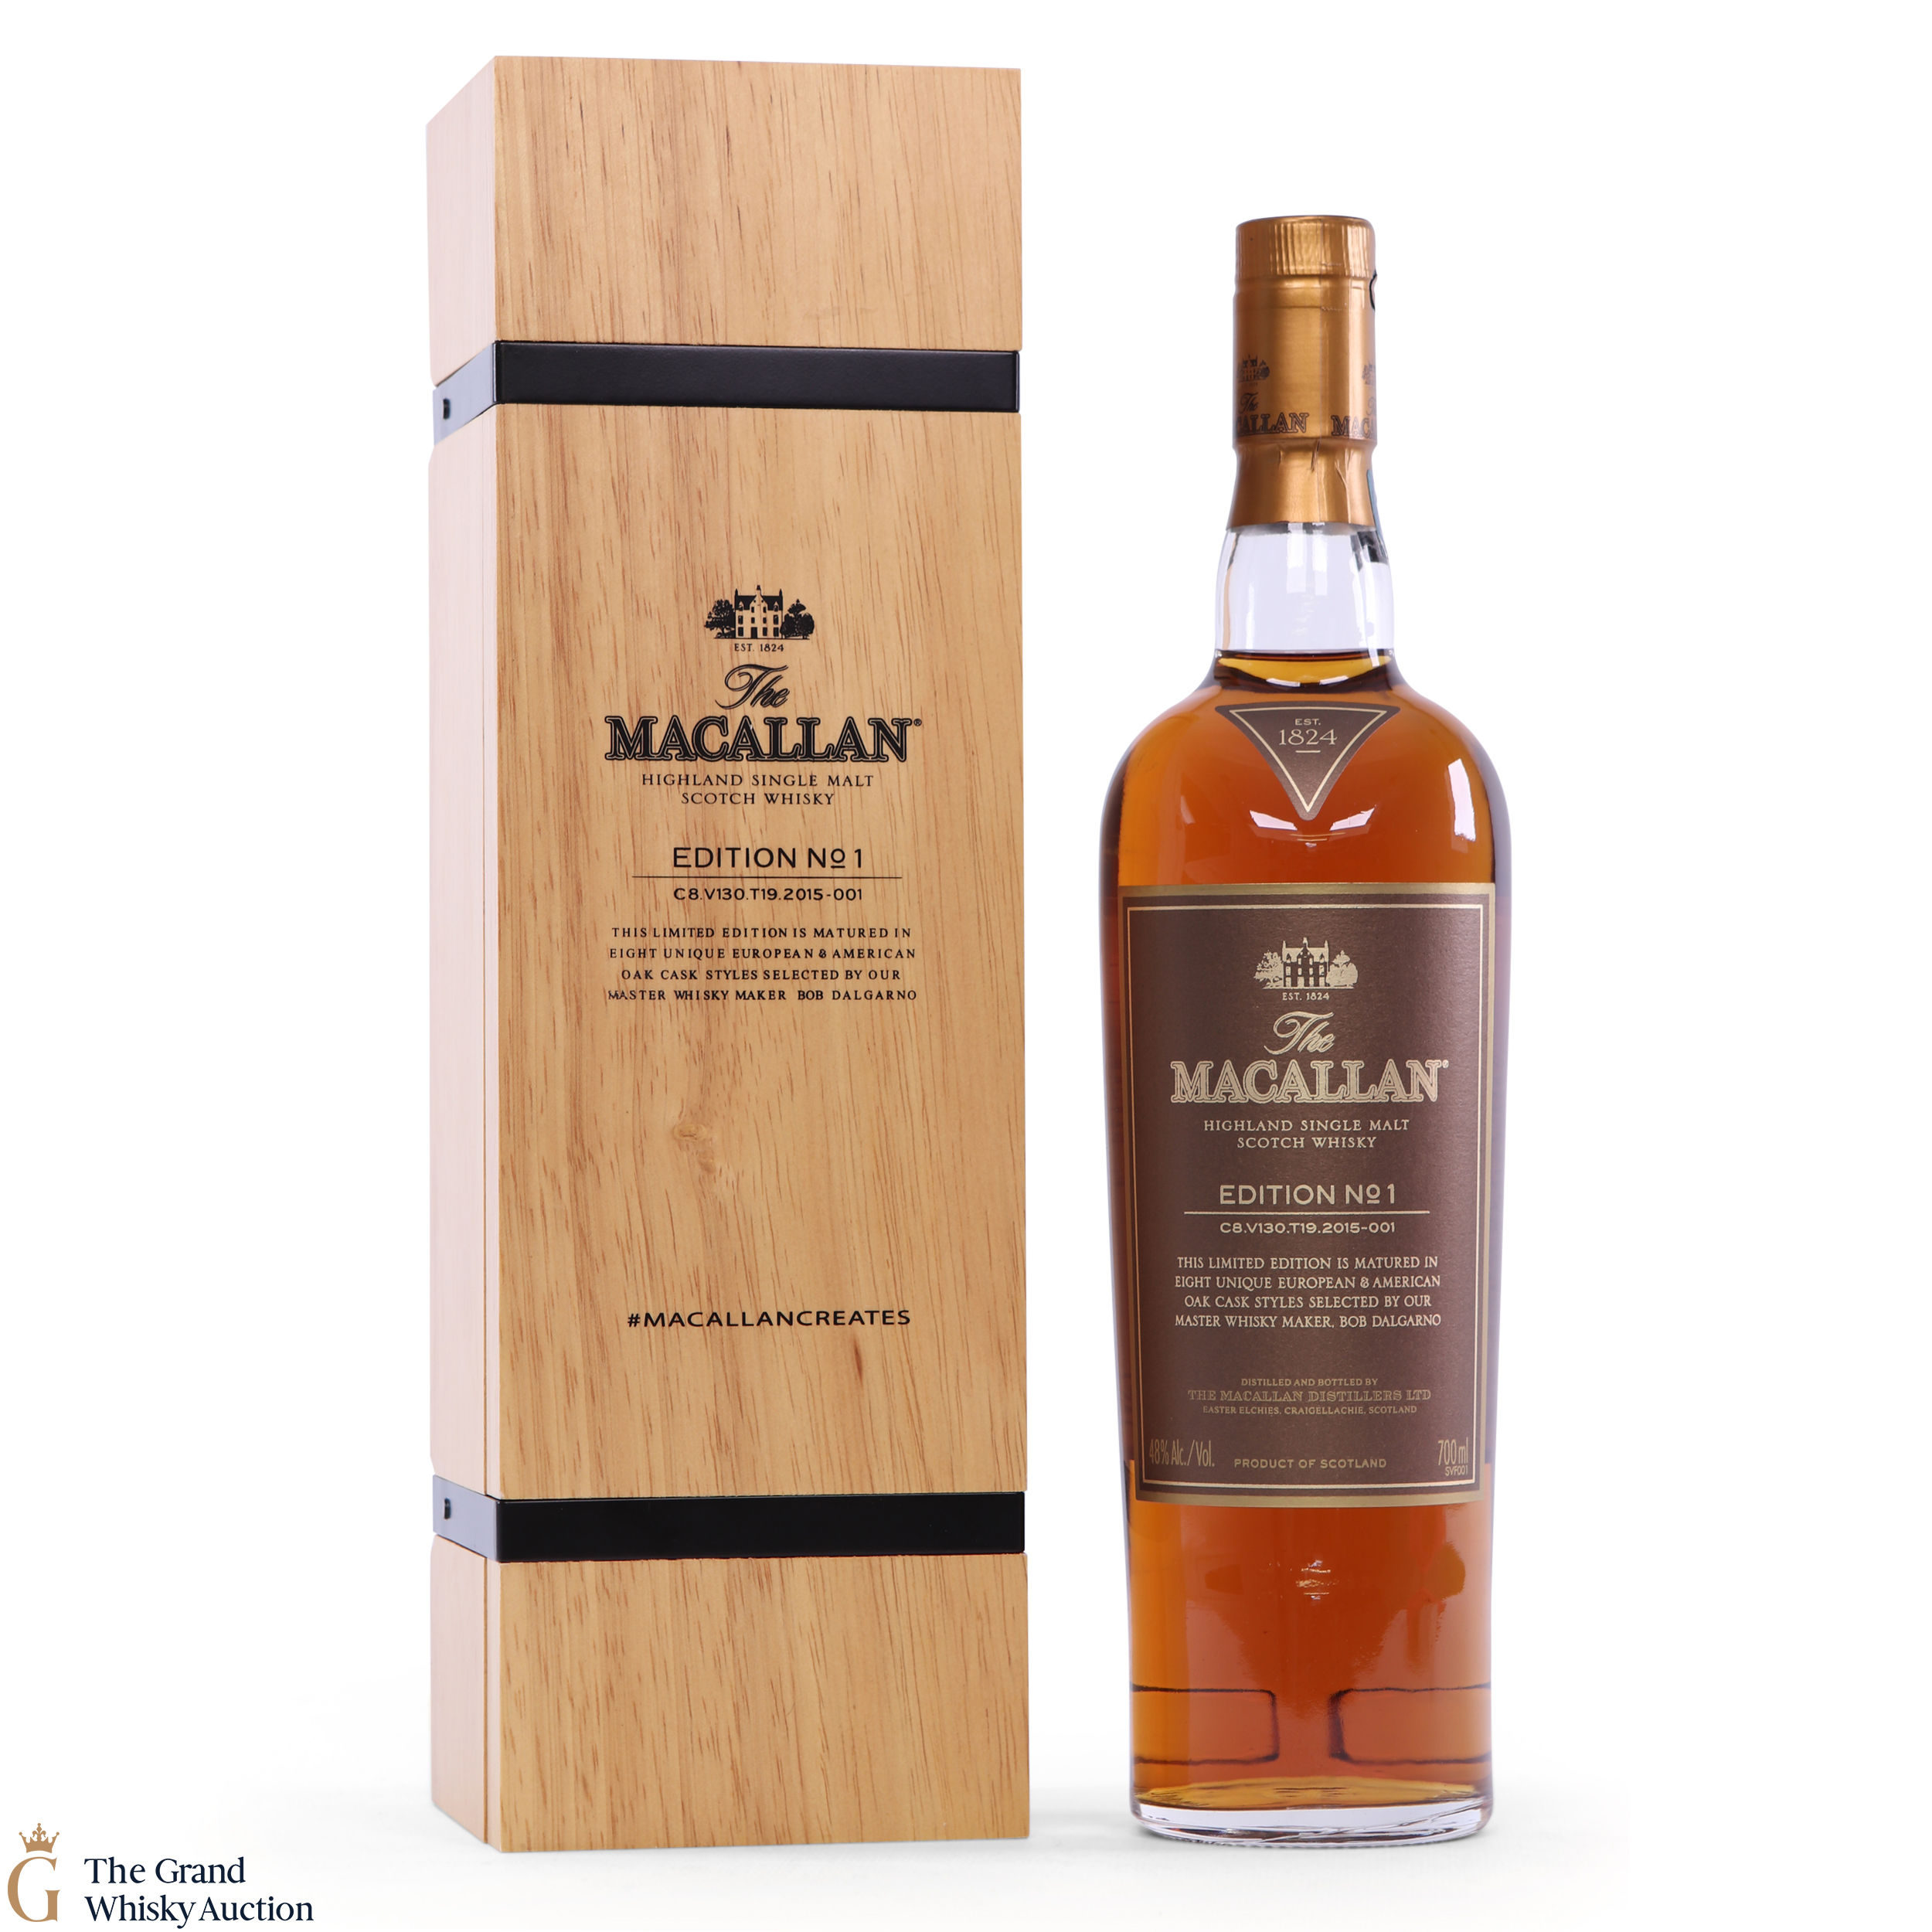 Macallan Edition No 1 Wooden Box Auction The Grand Whisky Auction